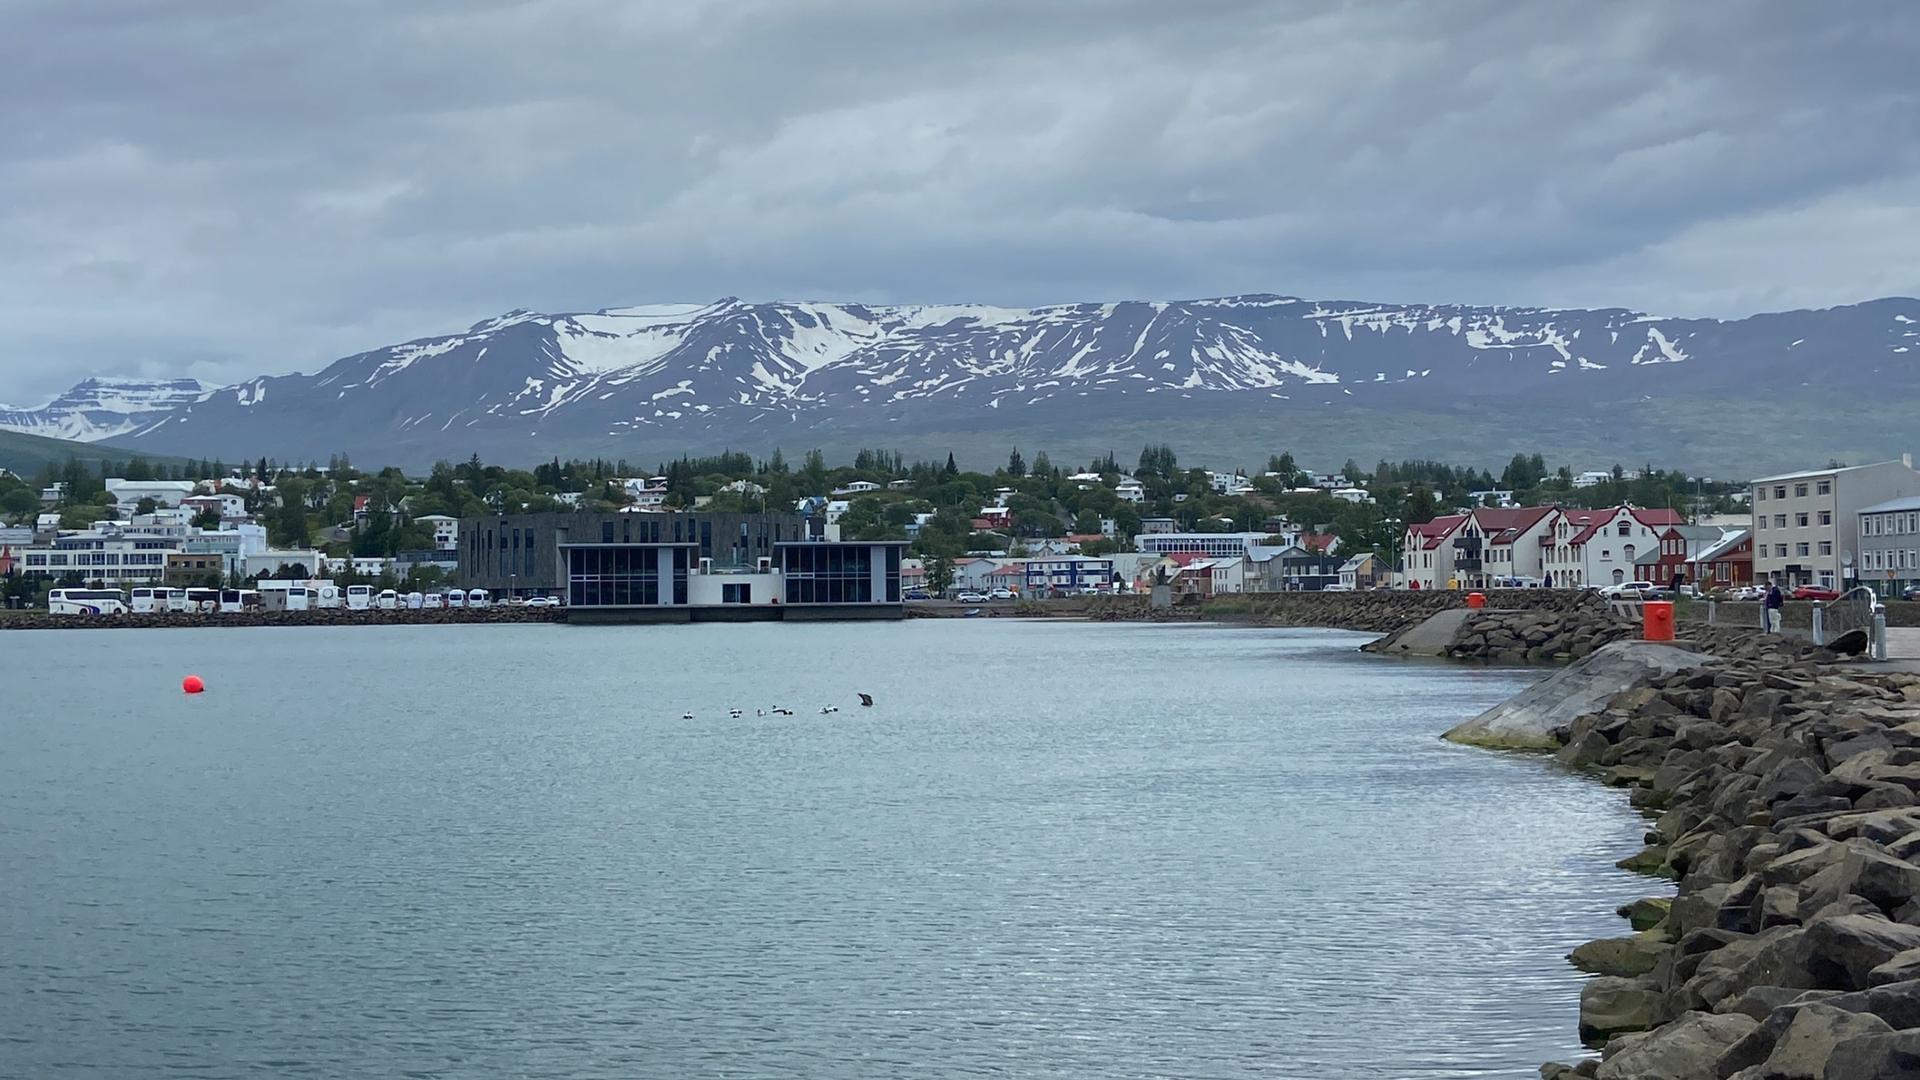 Akureyri is Iceland’s second largest city, with 18,000 residents. It gets all of its electricity from hydroelectric dams and all of its heat and hot water from geothermal boreholes.